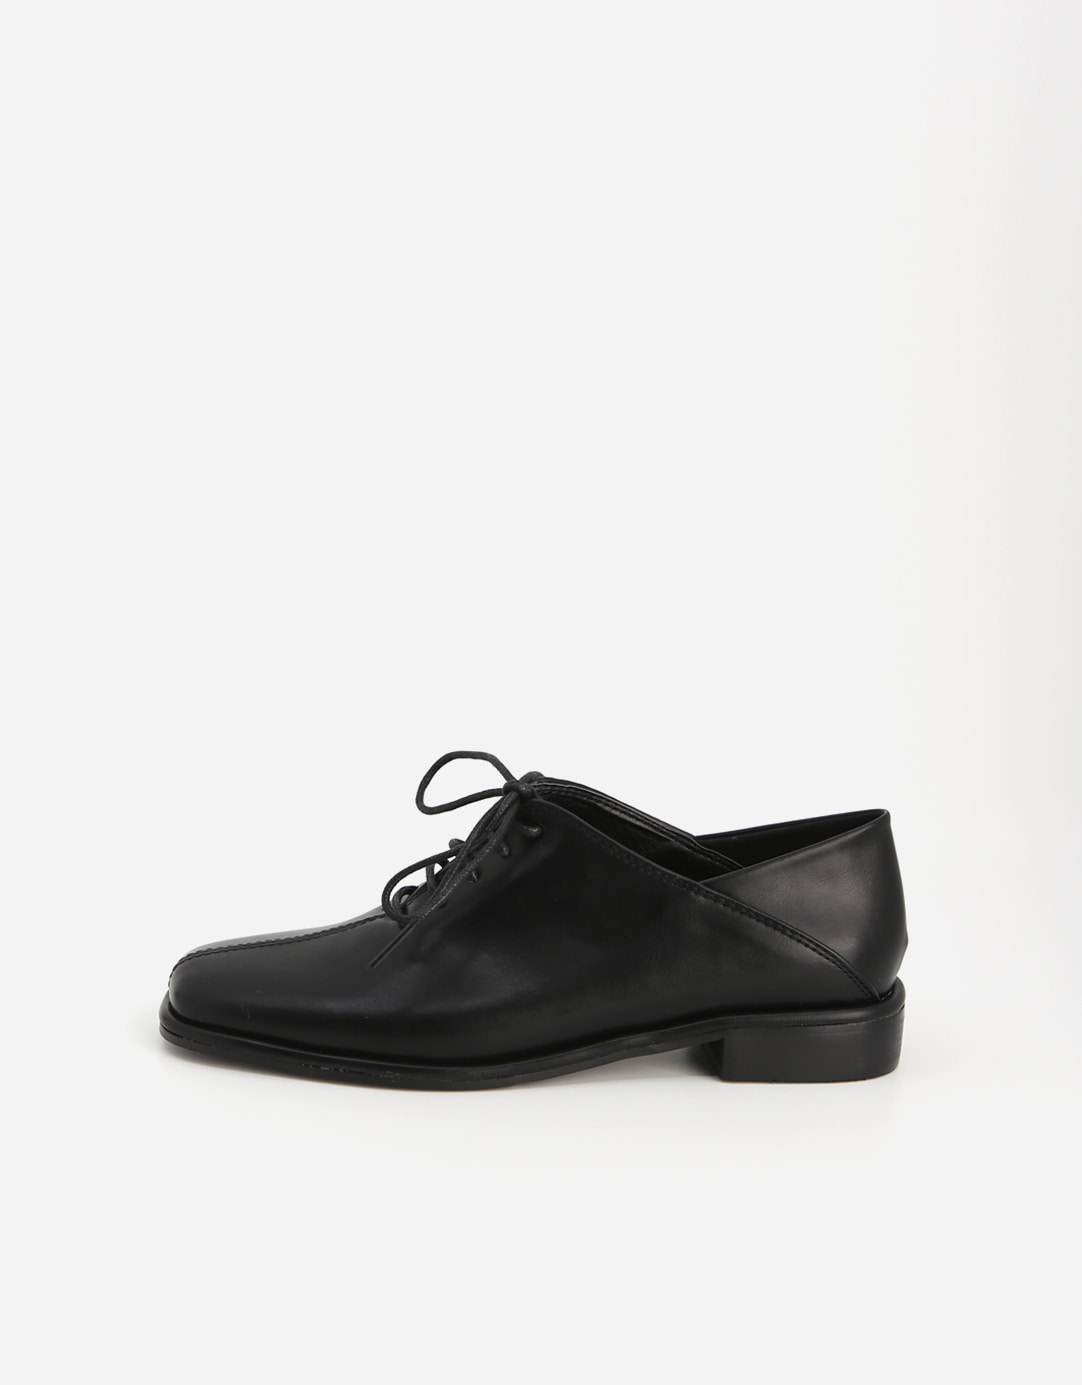 TWOWAY LACE UP LOAFER